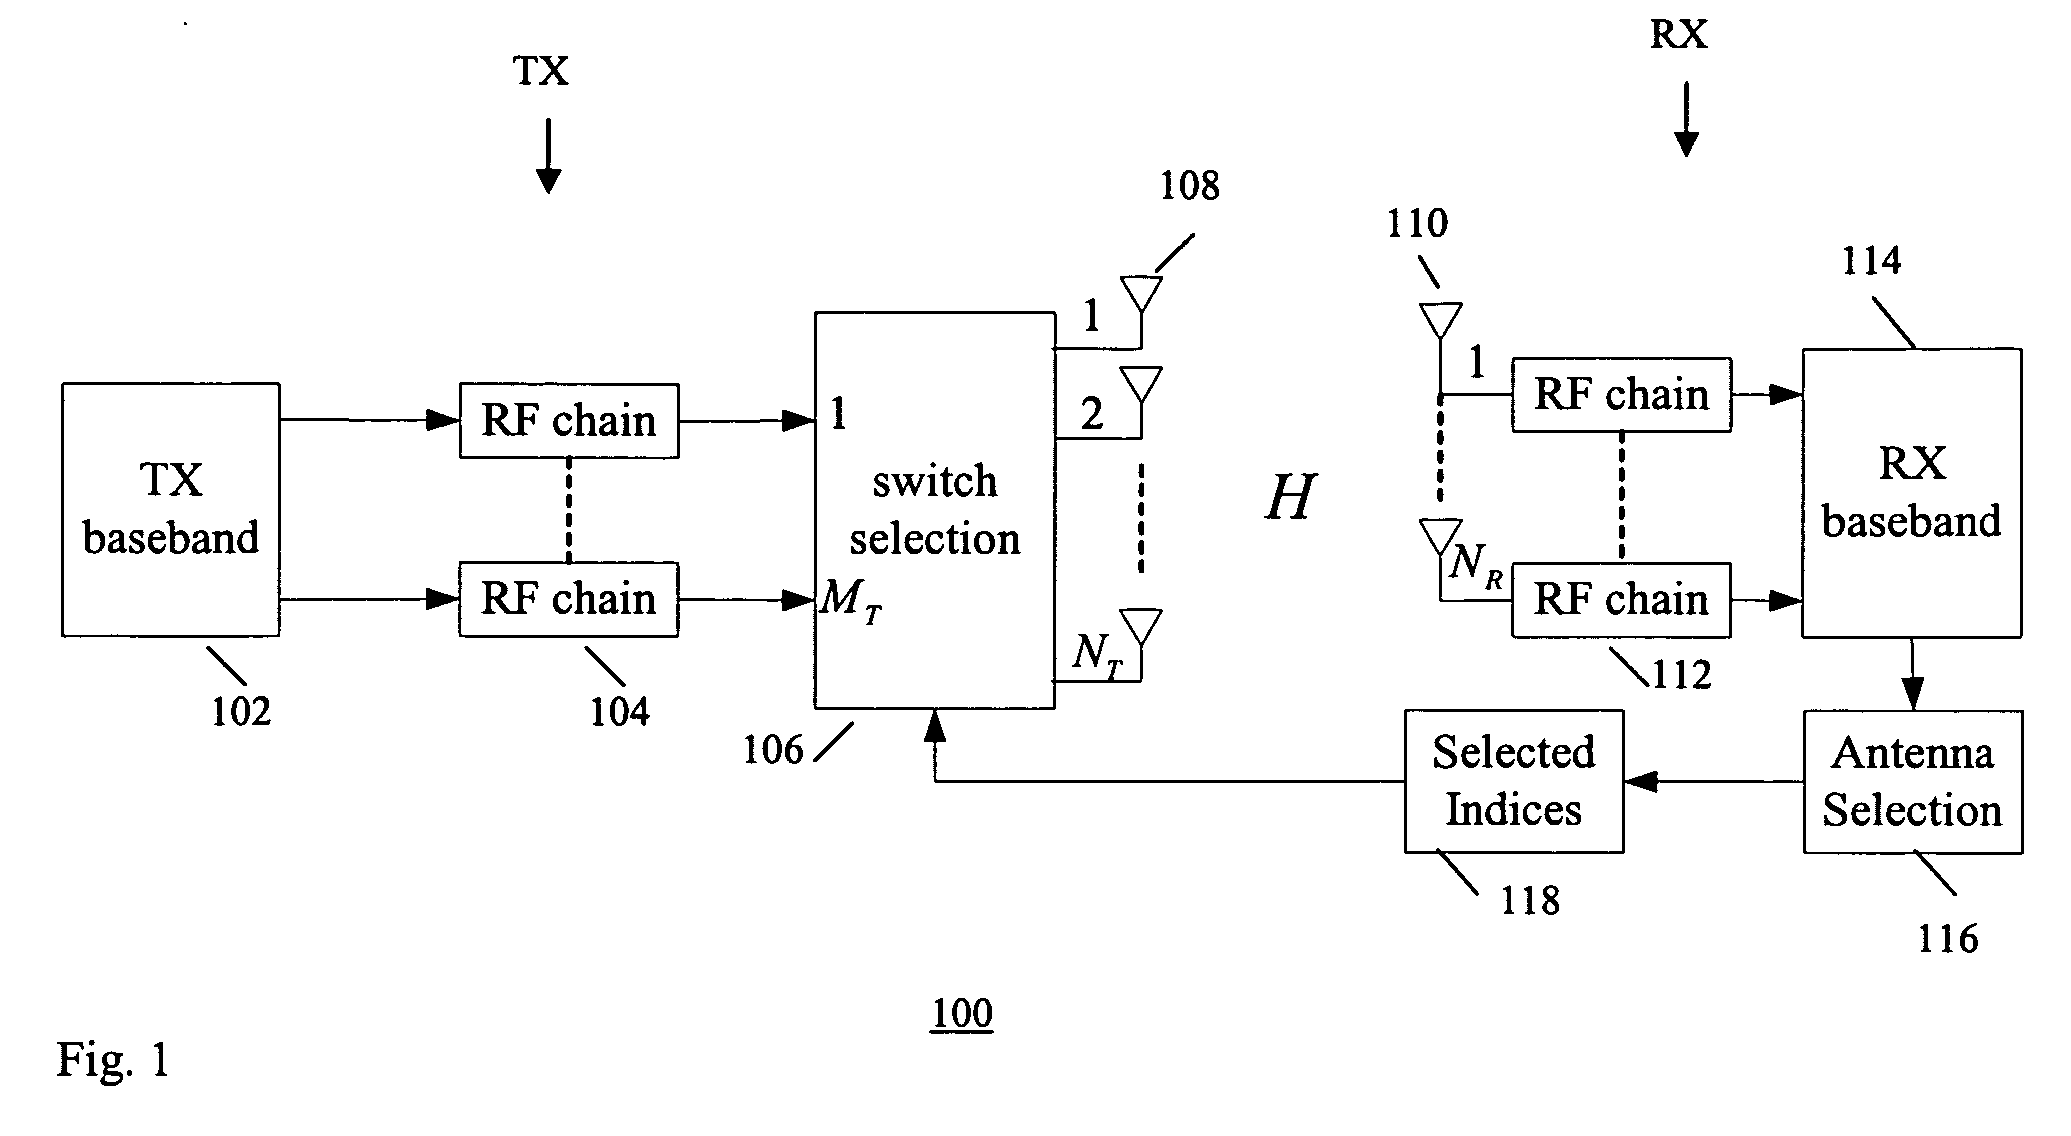 Methods of antenna selection for downlink MIMO-OFDM transmission over spatial correlated channels